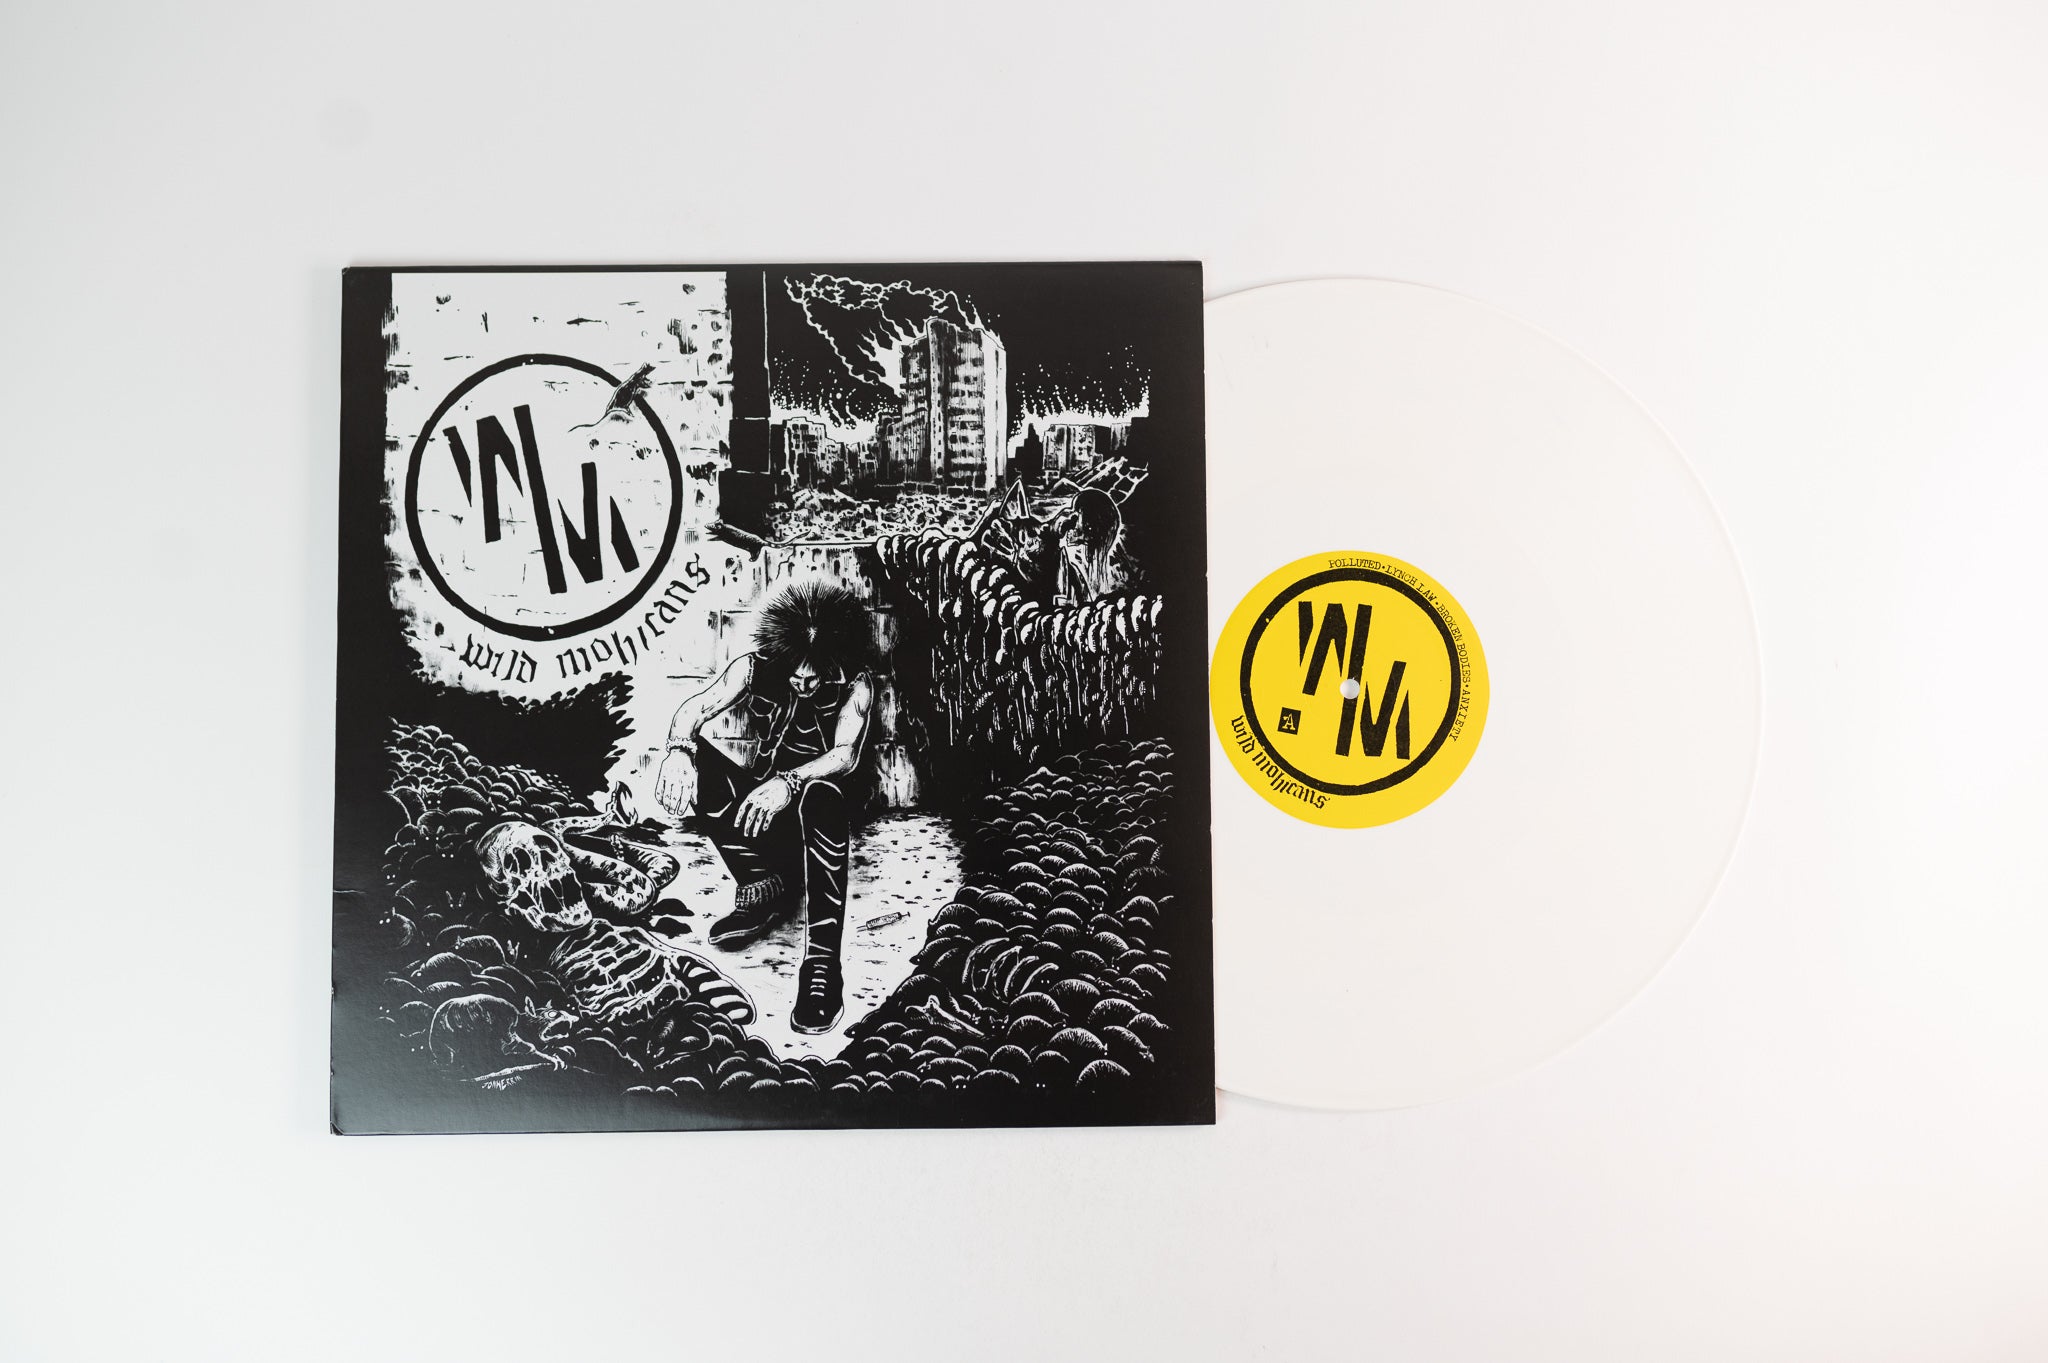 Wild Mohicans - Get Me Out Of This Hell on Black Water Ltd White Vinyl